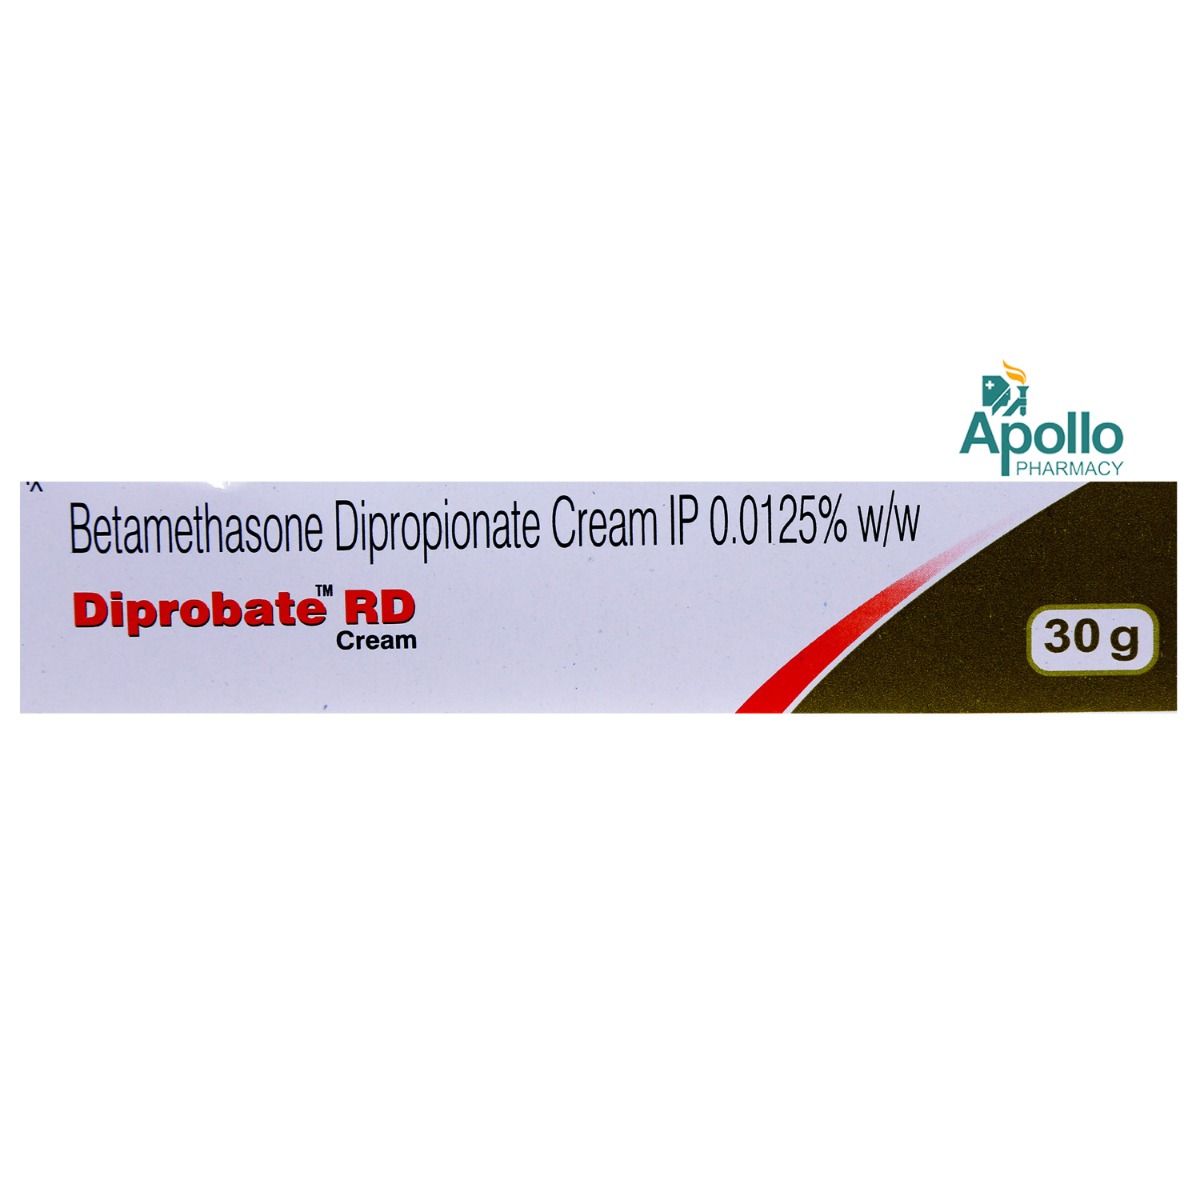 Diprobate RD Cream 30 gm Price, Uses, Side Effects, Composition - Apollo  Pharmacy